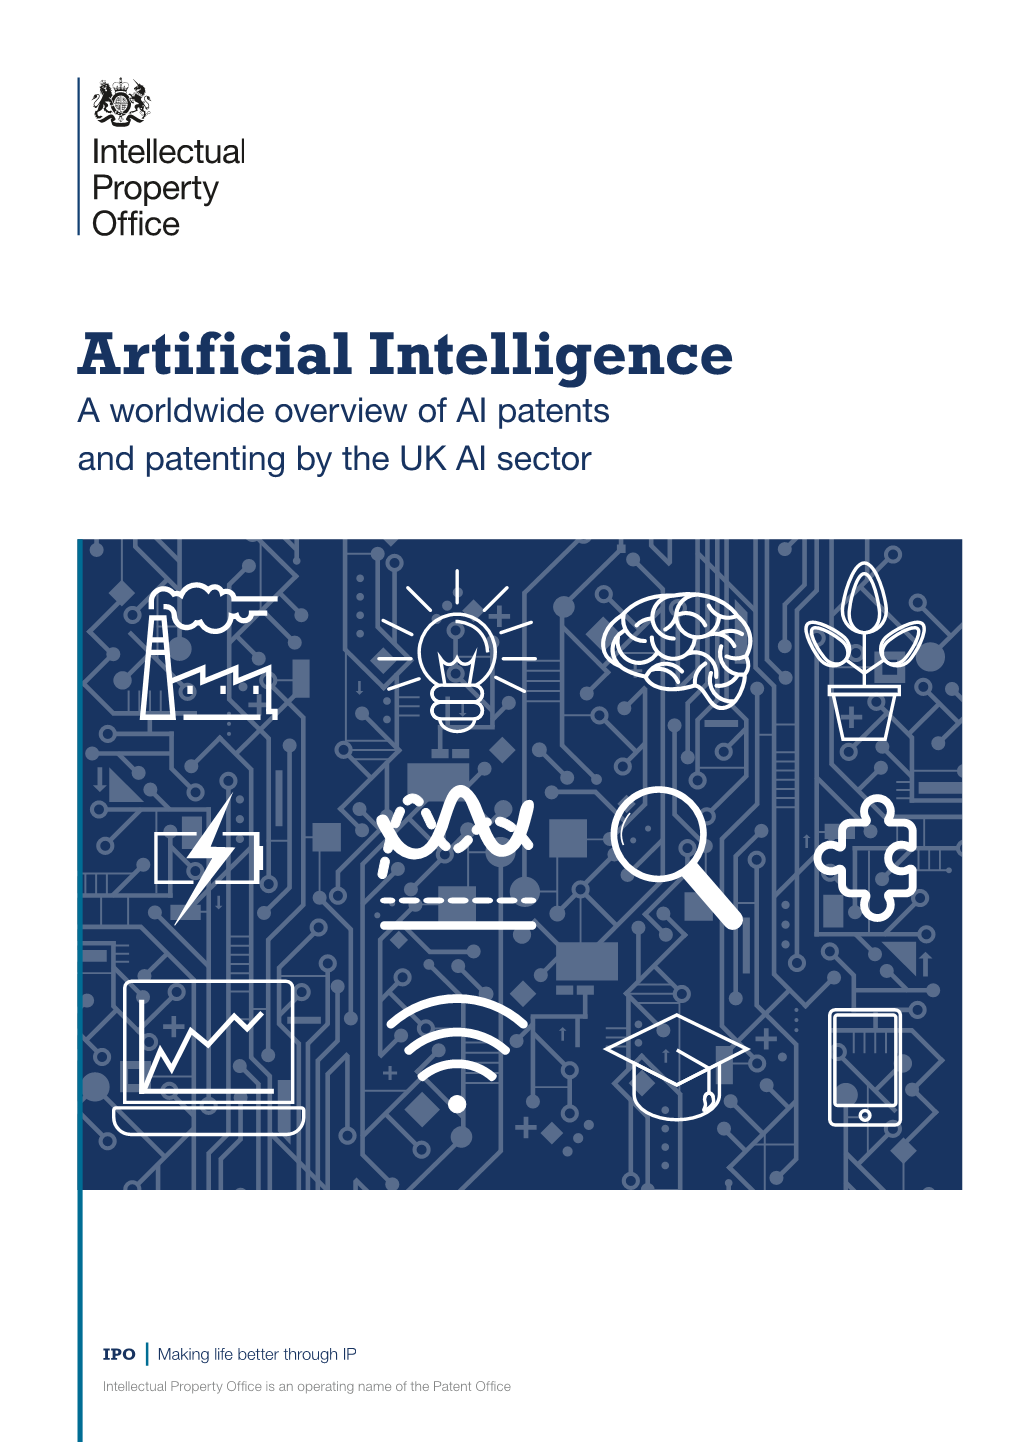 Artificial Intelligence – a Worldwide Overview of AI Patents